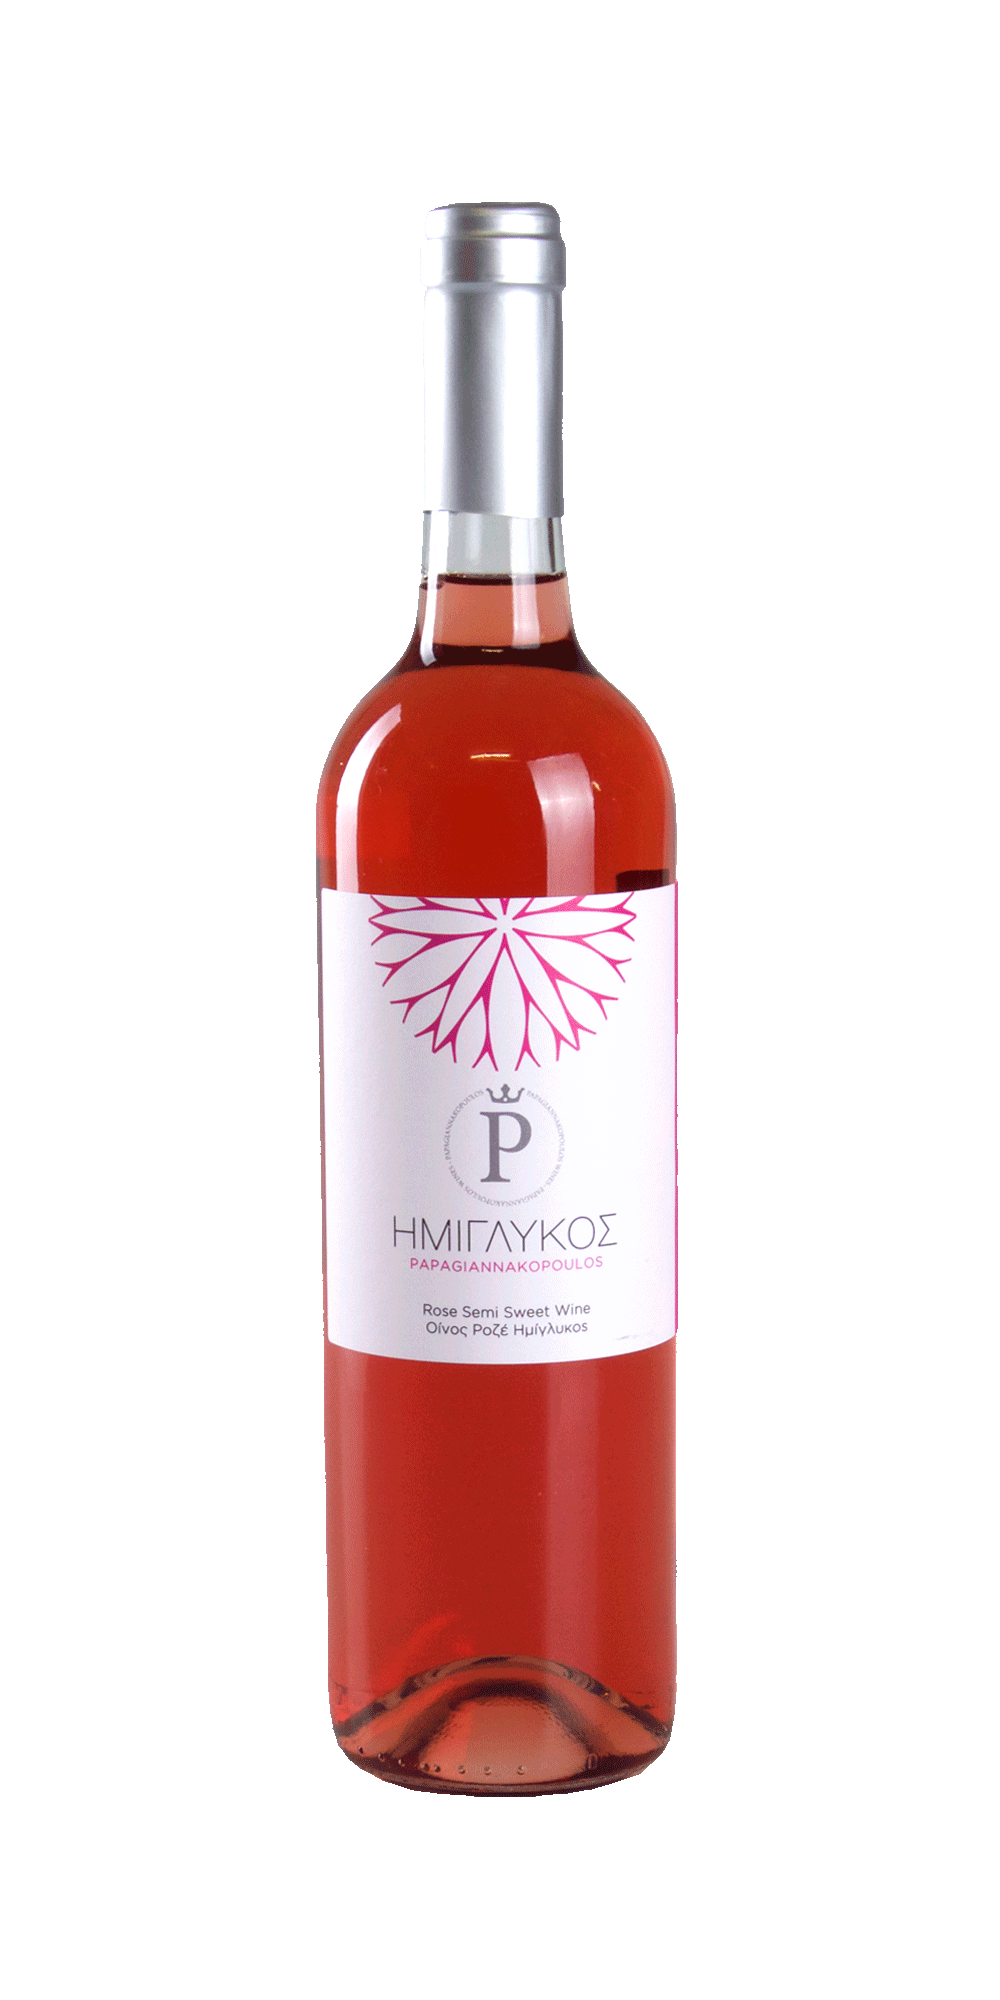 Imiglykos Rose 2020 - Papagiannakopoulos Winery